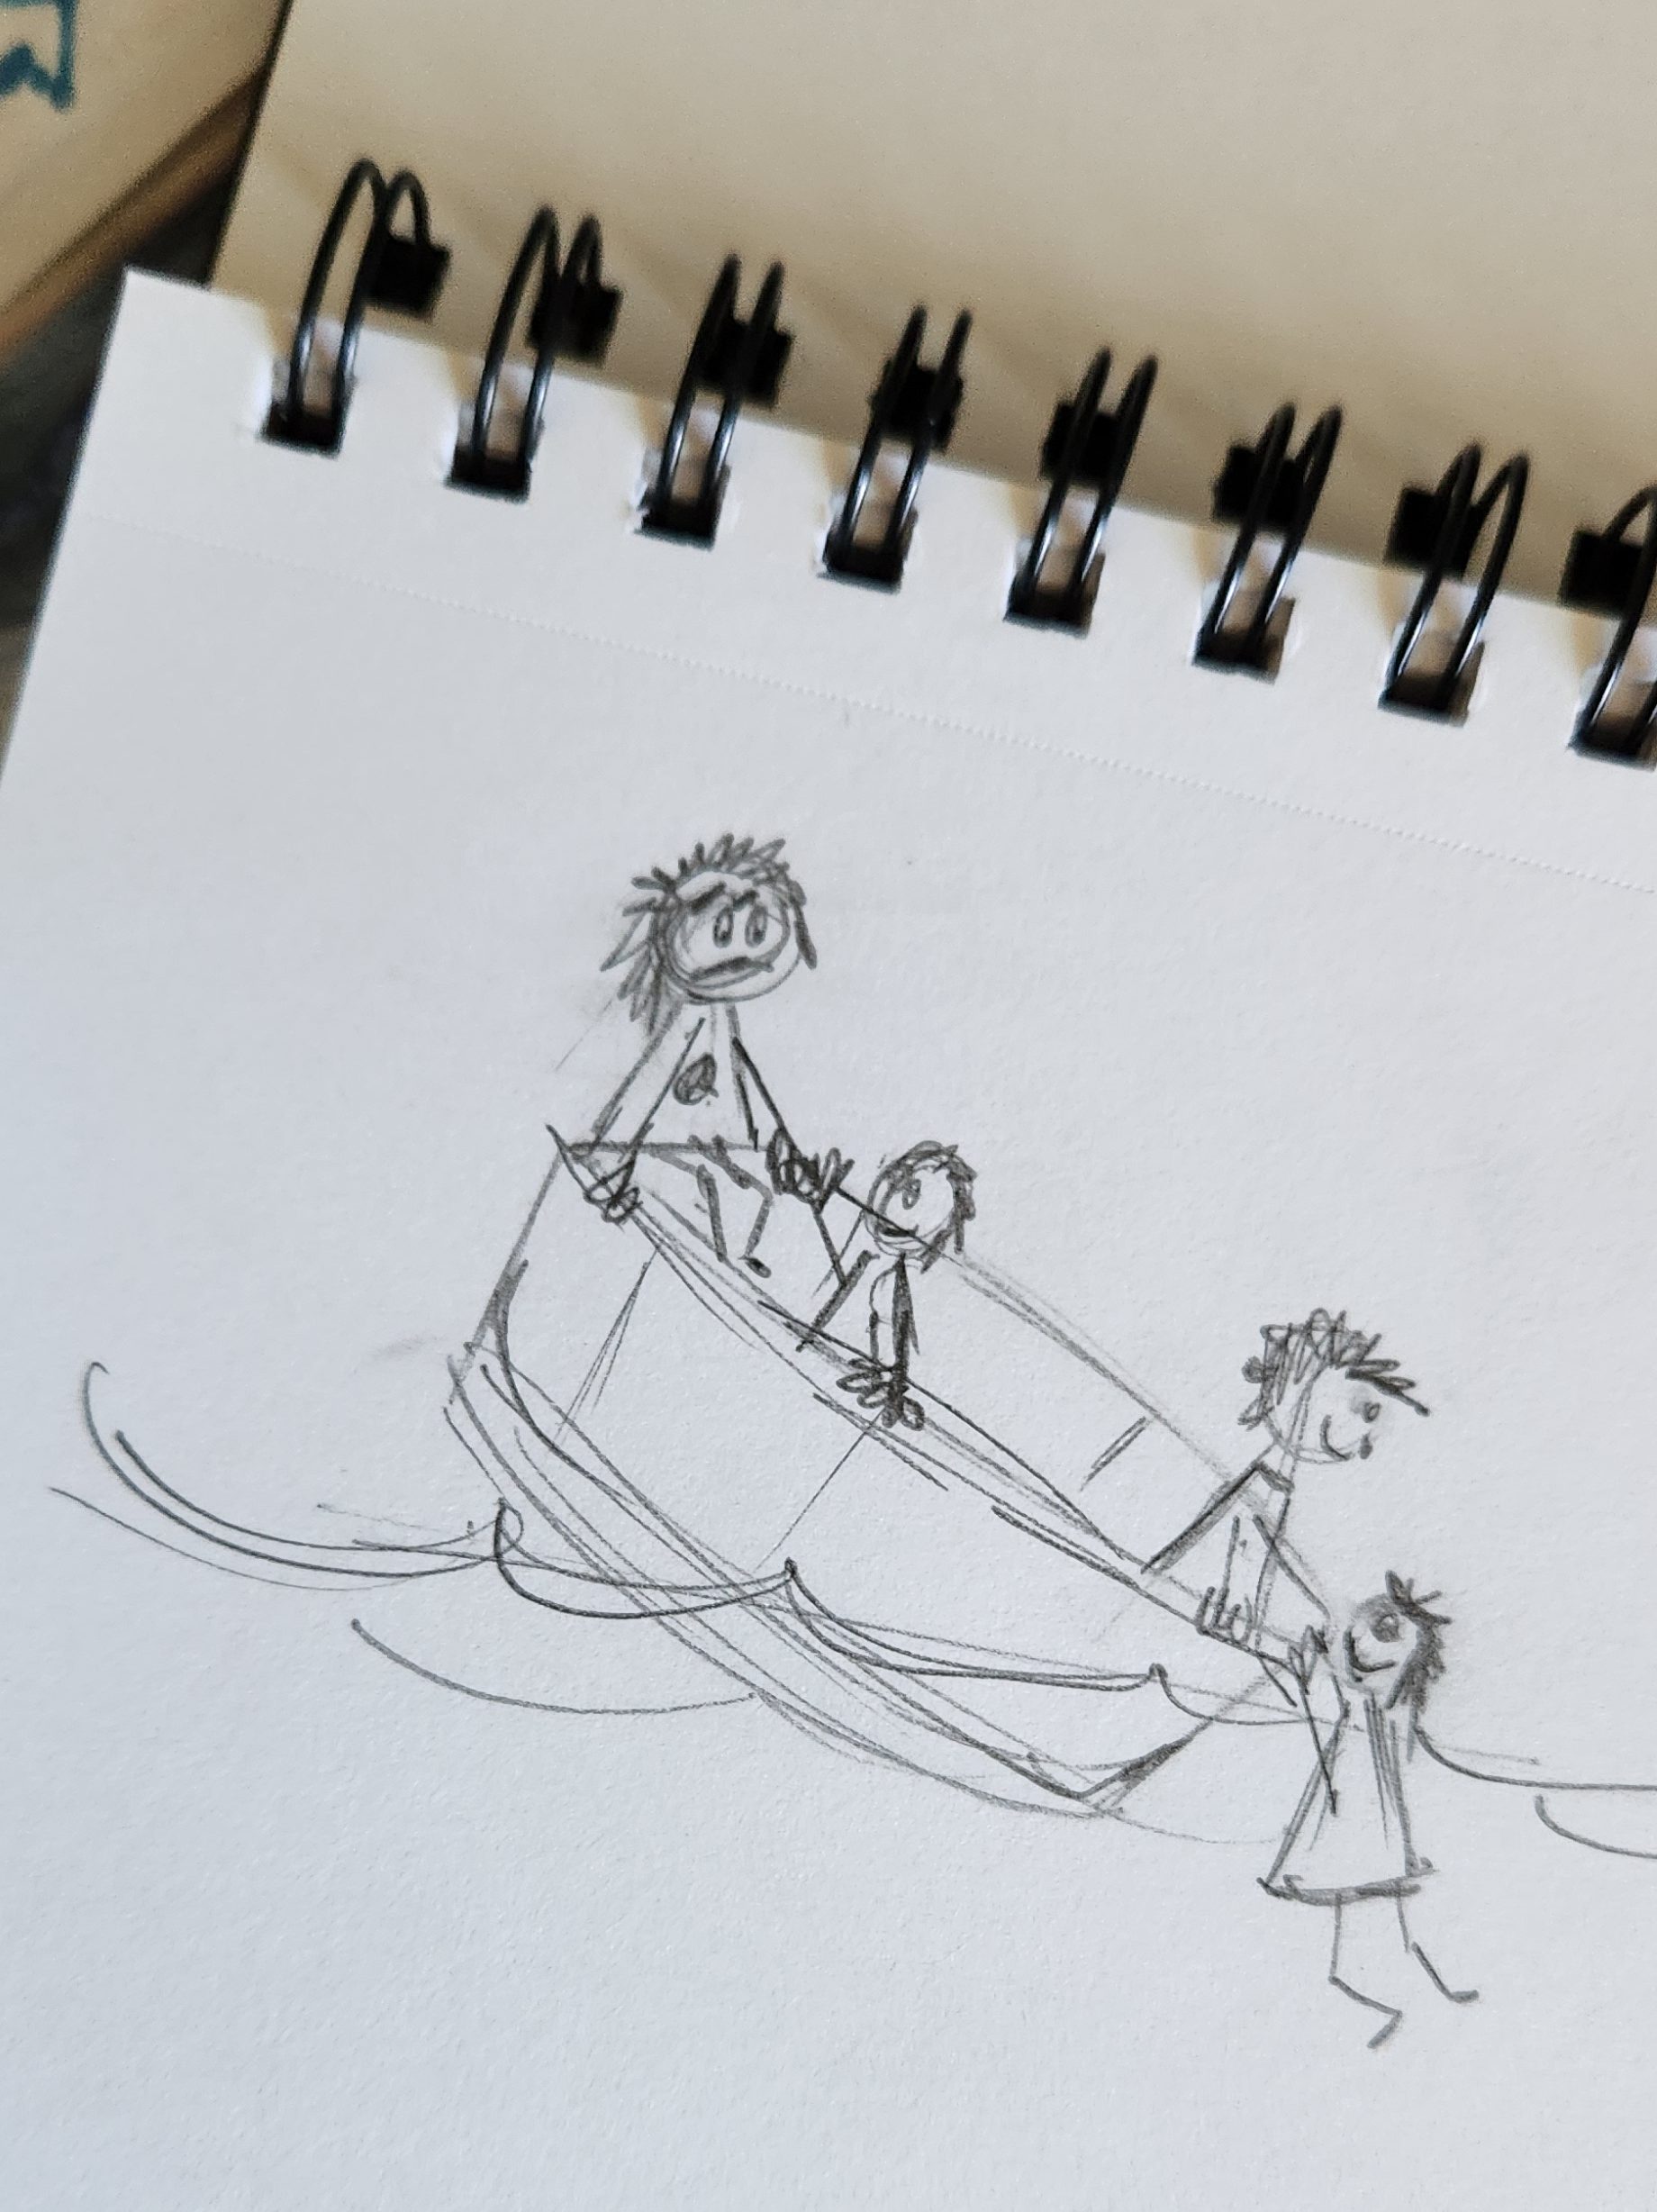 cartoon sketch of a life raft and people